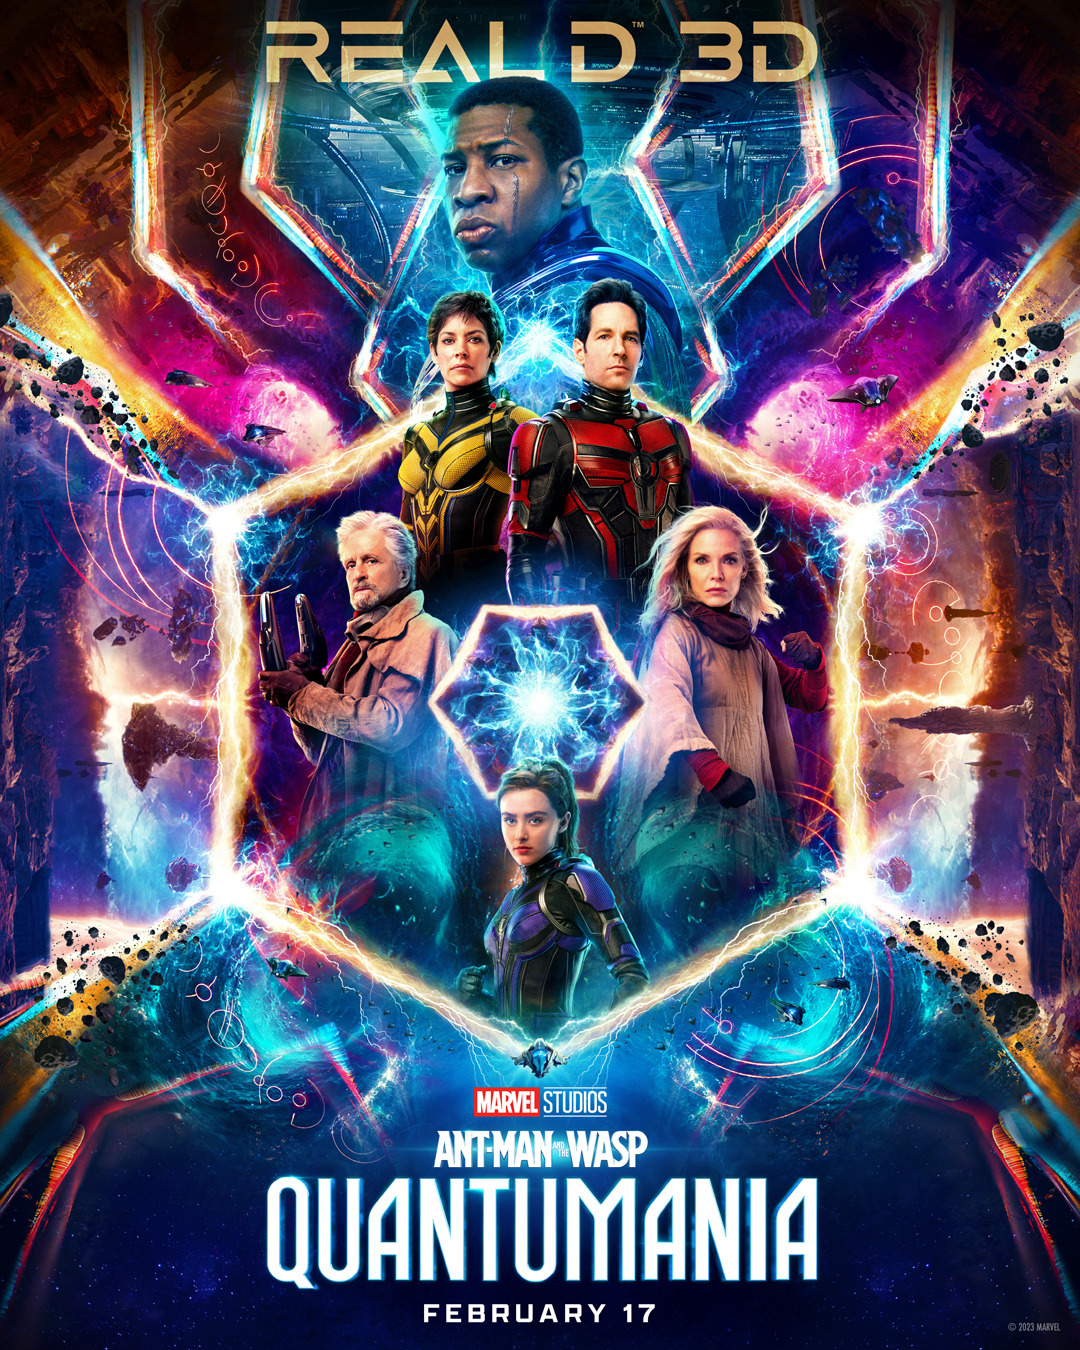 Extra Large Movie Poster Image for Ant-Man and the Wasp: Quantumania (#12 of 27)